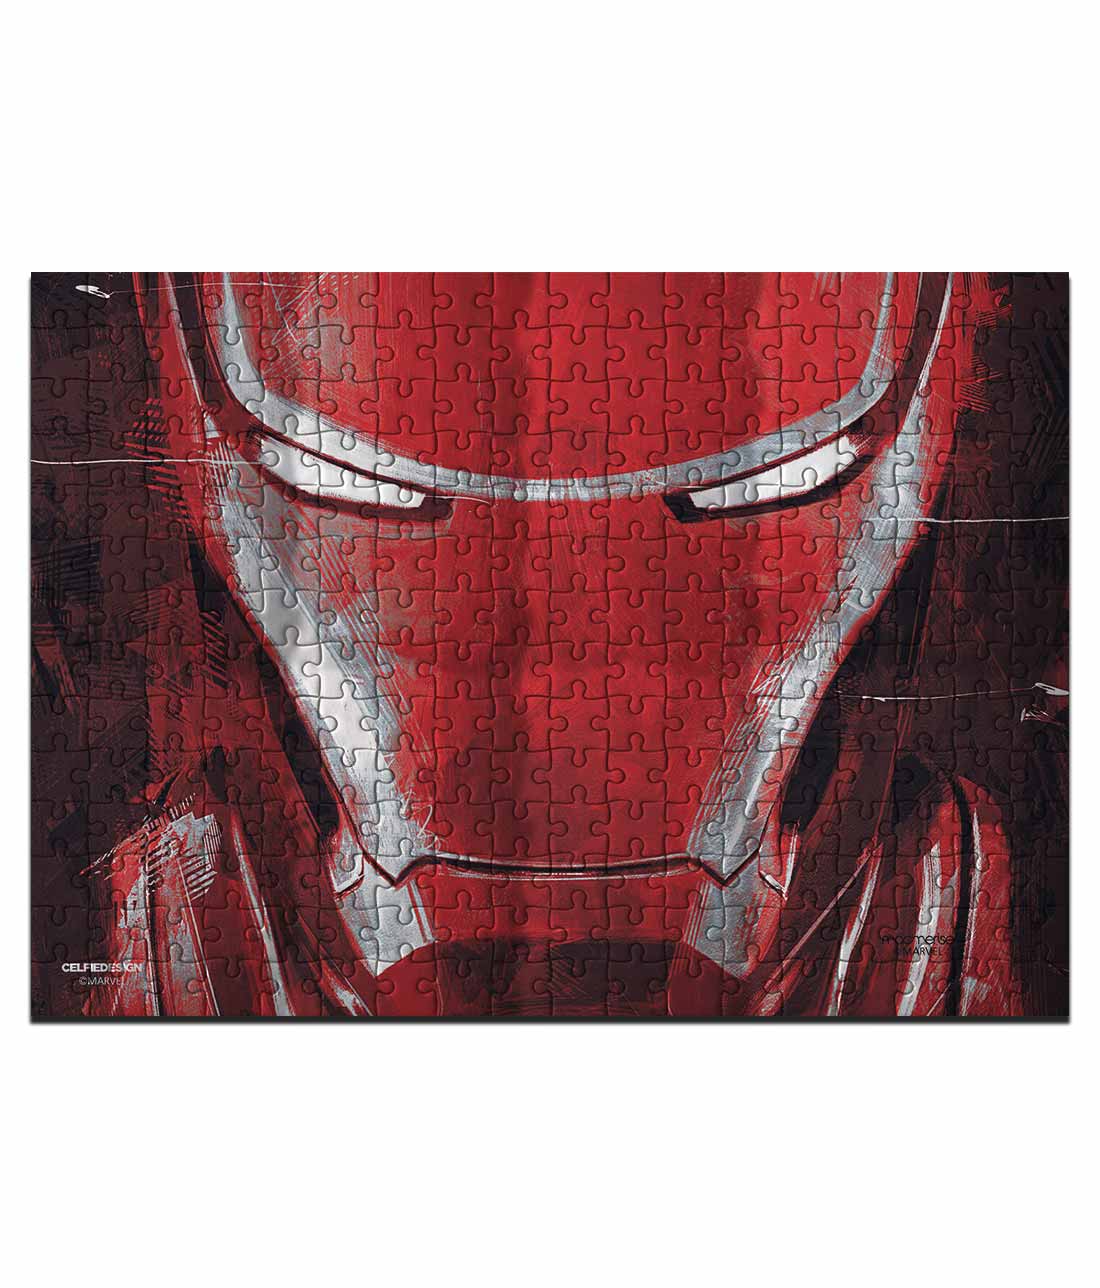 Buy Charcoal Art Iron man - Magnetic Puzzles Puzzles Online